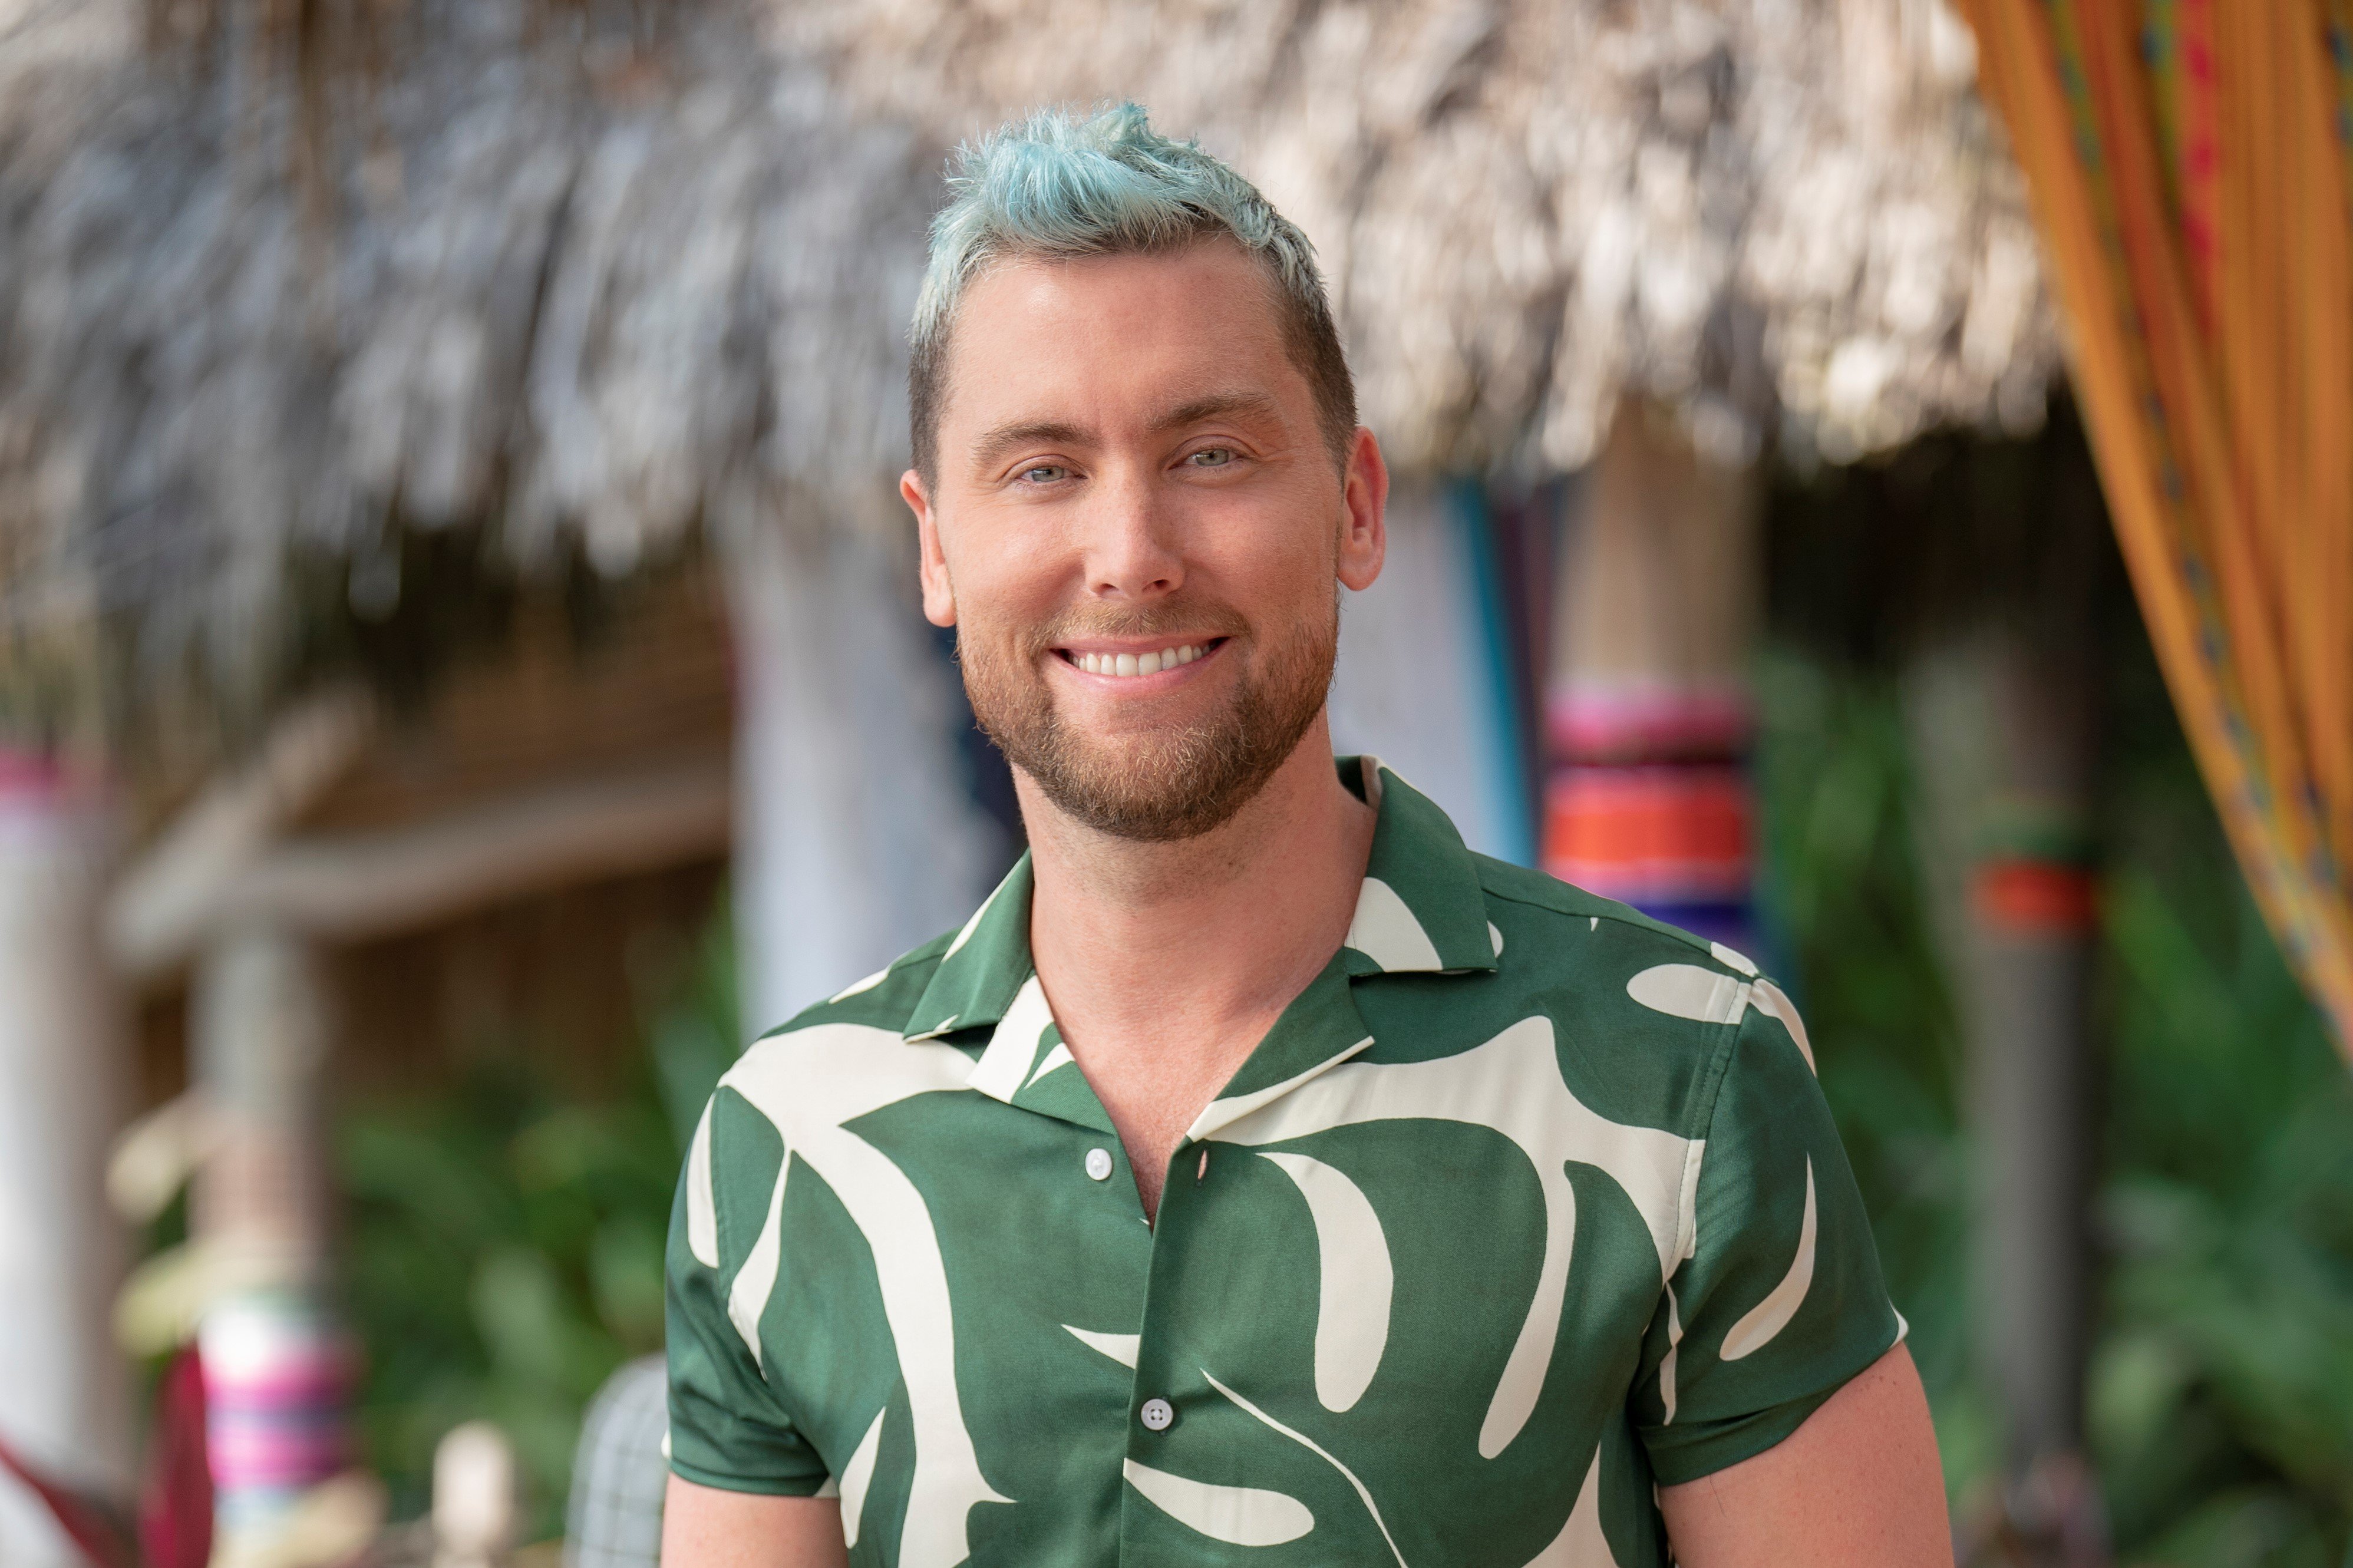 Lance Bass in a green and white patterned shirt.